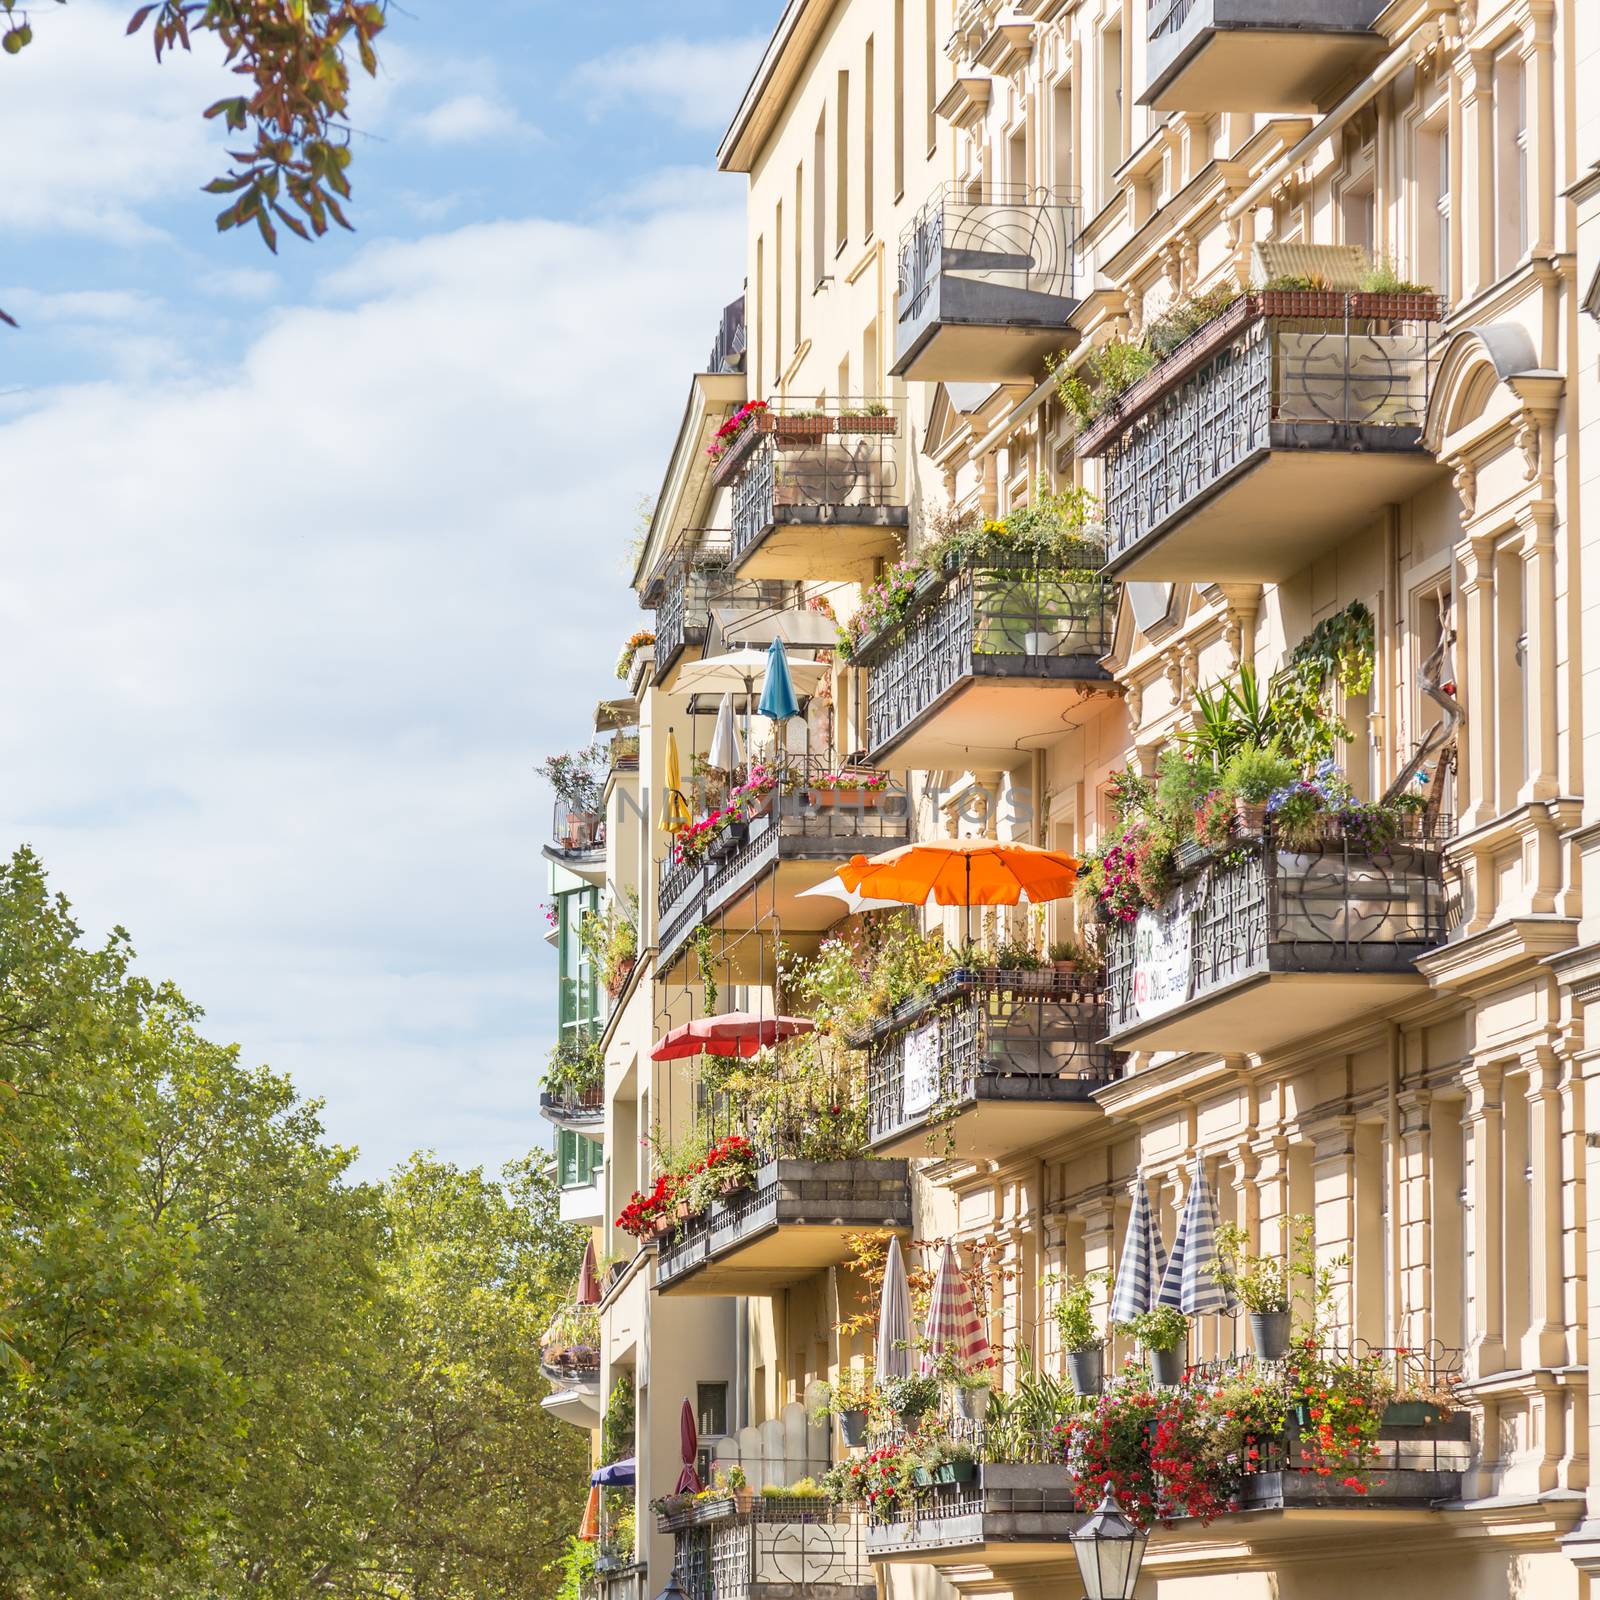 Traditional European Balcony with colorful flowers and flowerpots. by kasto